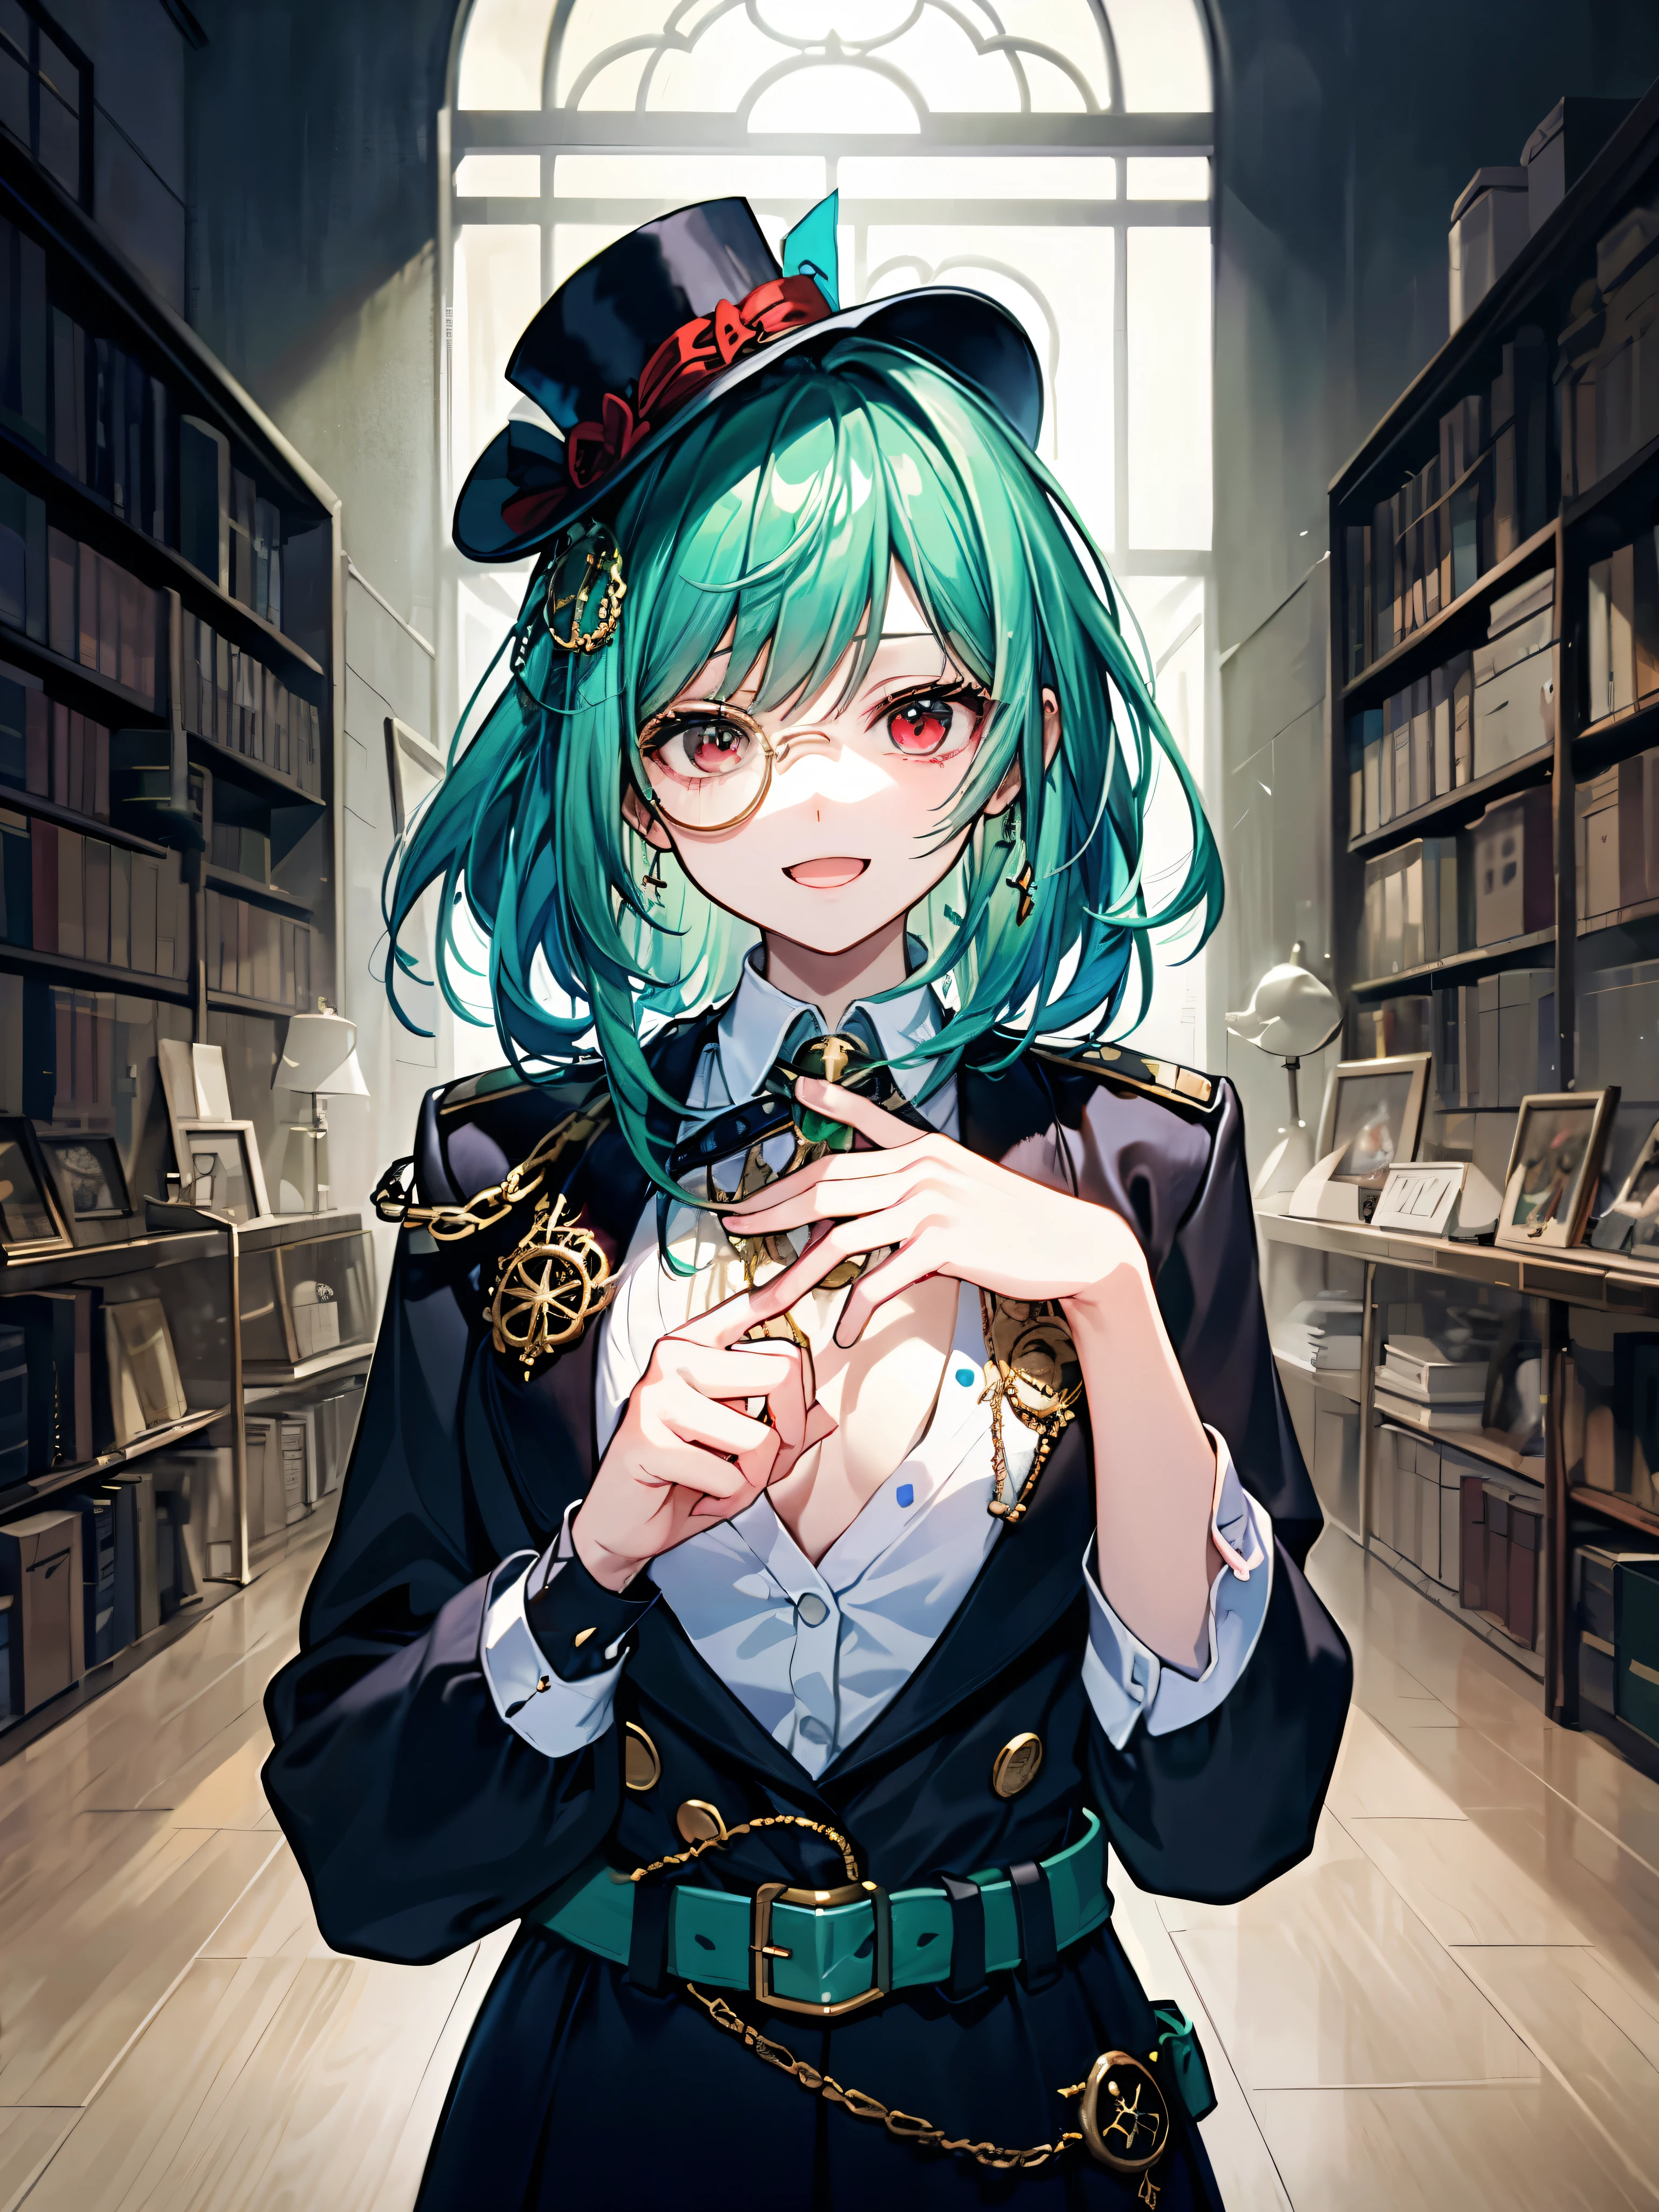 （（（masterpiece、Highest quality、highest quality、Highly detailed Unity 8ｋwallpaper、High resolution illustrations）））、（（Illustration of a girl alone、crossdressing、upper body））、（（（beautiful girl）））、（Emerald green hair、messy hair、sidelocks、Red Eyes、crazy eyes、crazy smile）、（（（flat chest）））、（（（monocle）））、Pocket watch、（（（Black Top Hat、Black suit、White shirt、belt）））、Huge medieval libraries、A large number of books、Dimly lit room